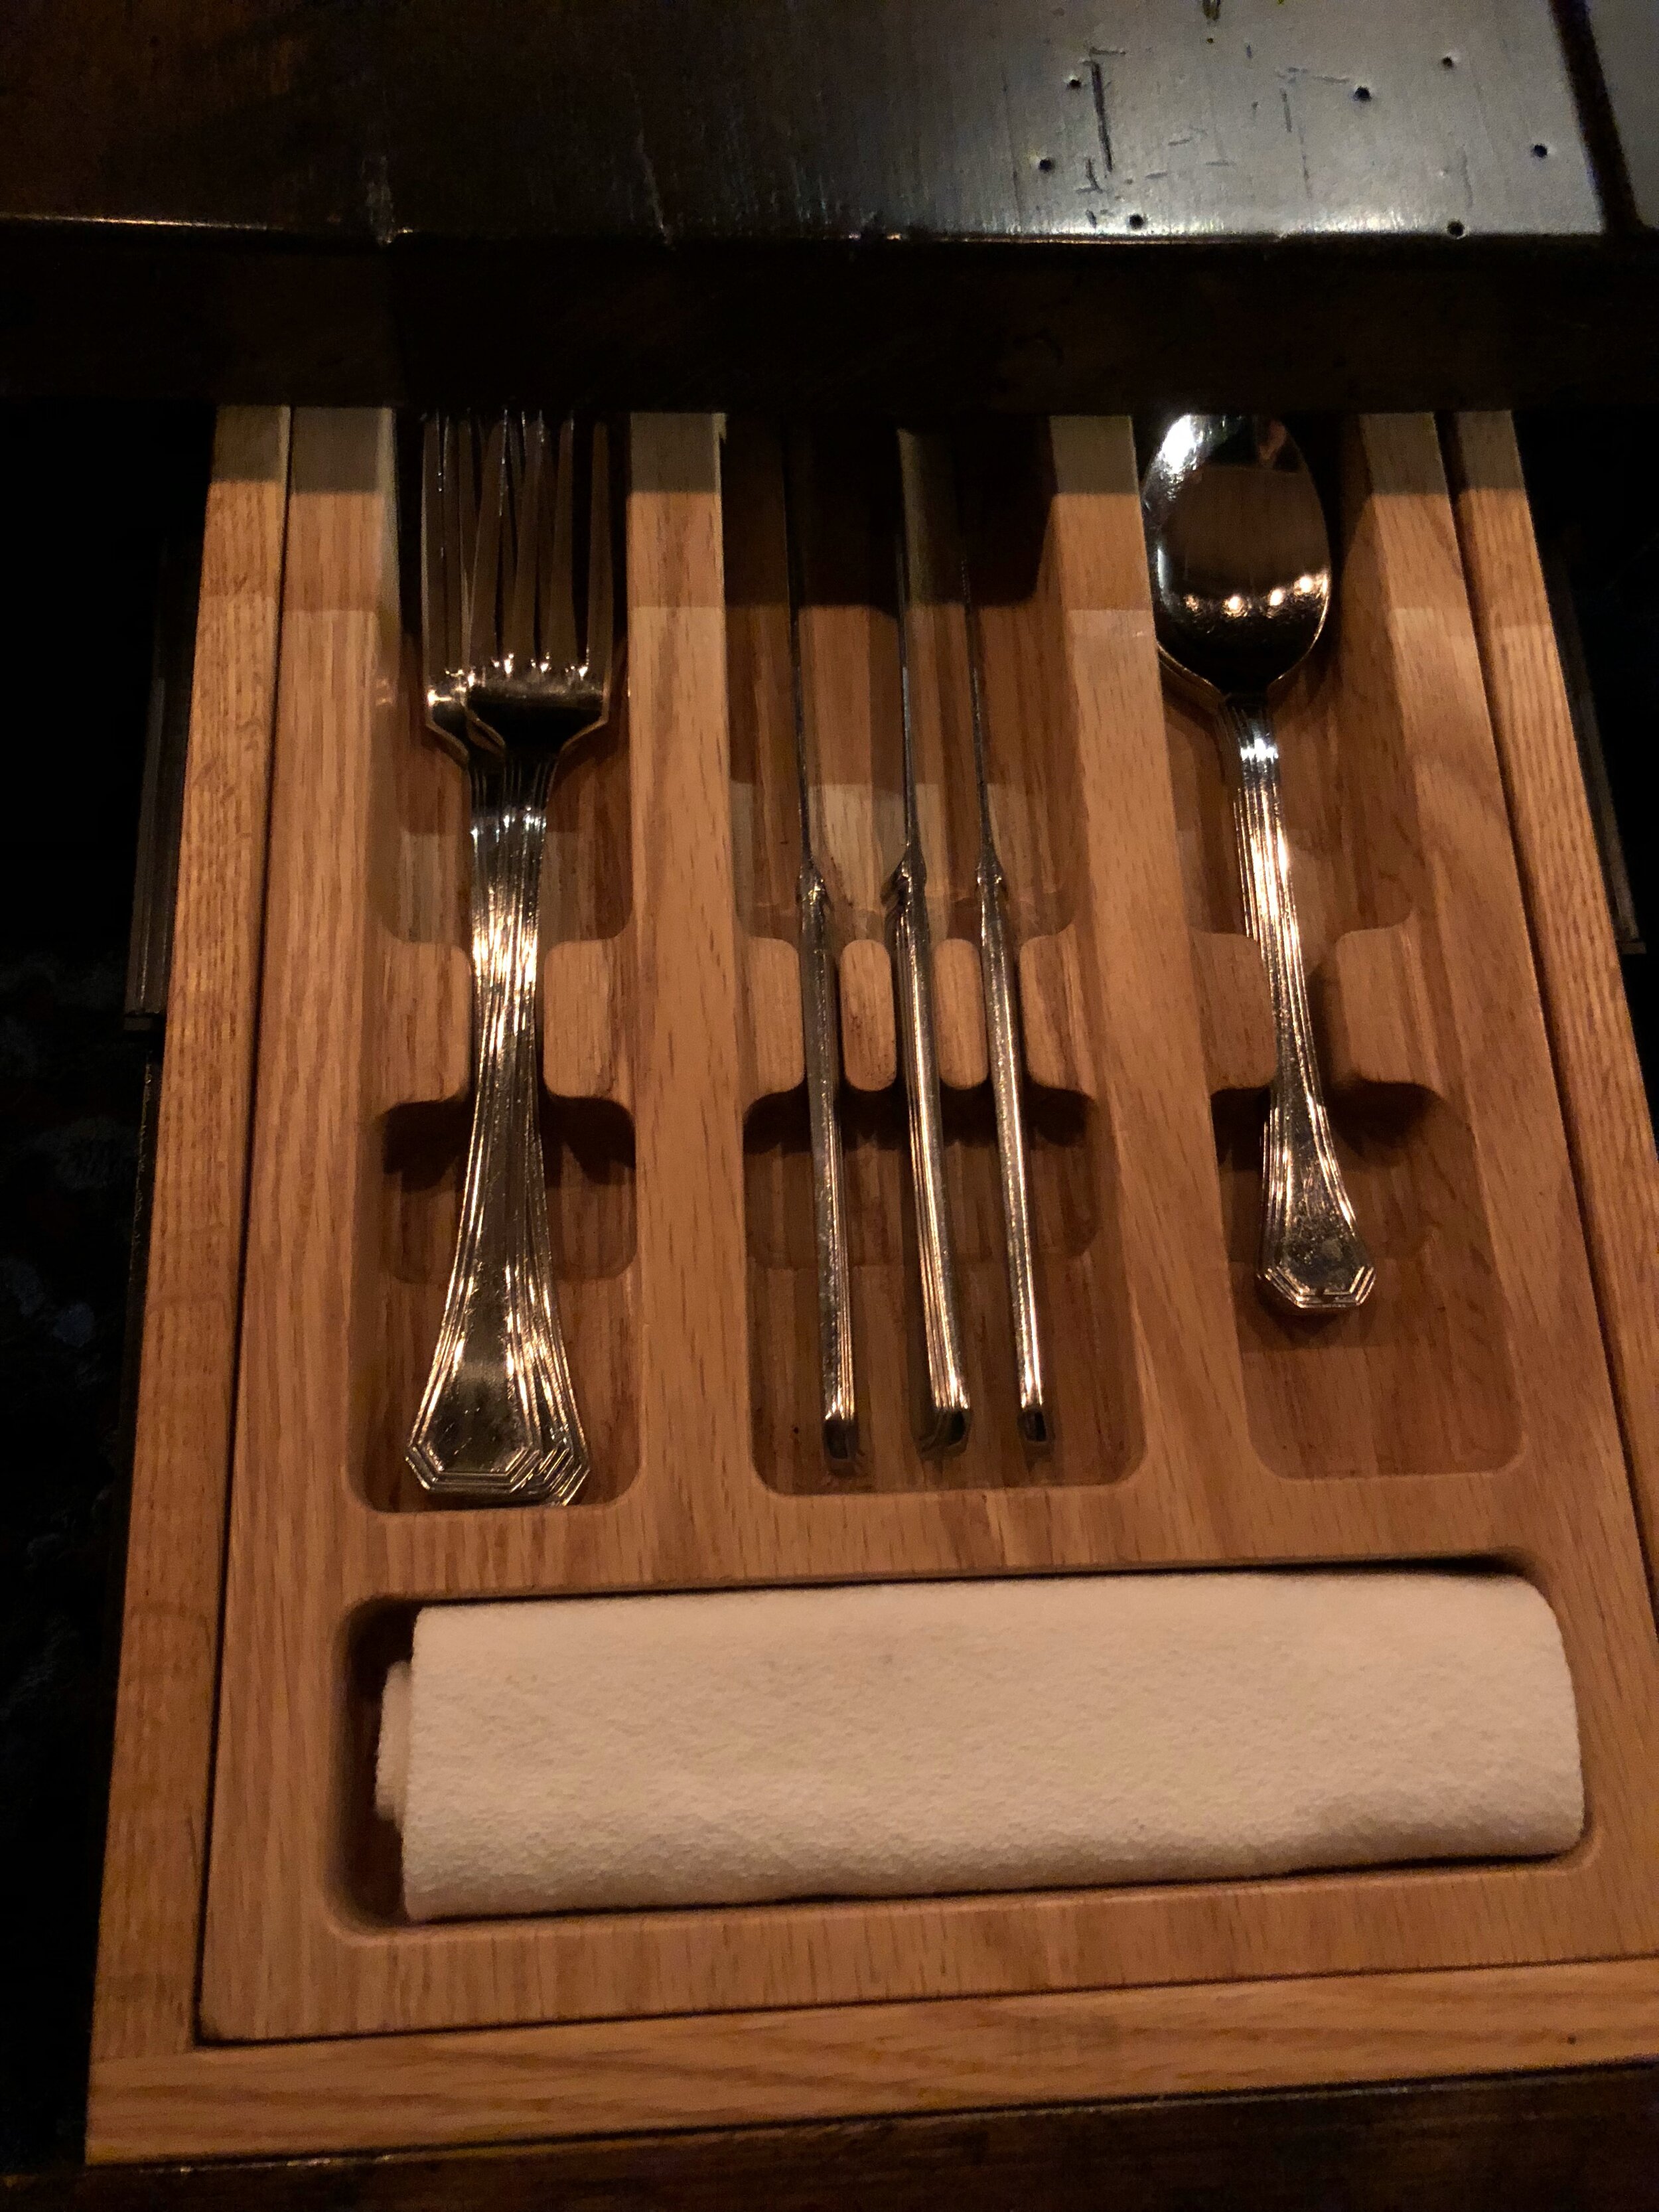 Your own silverware drawer